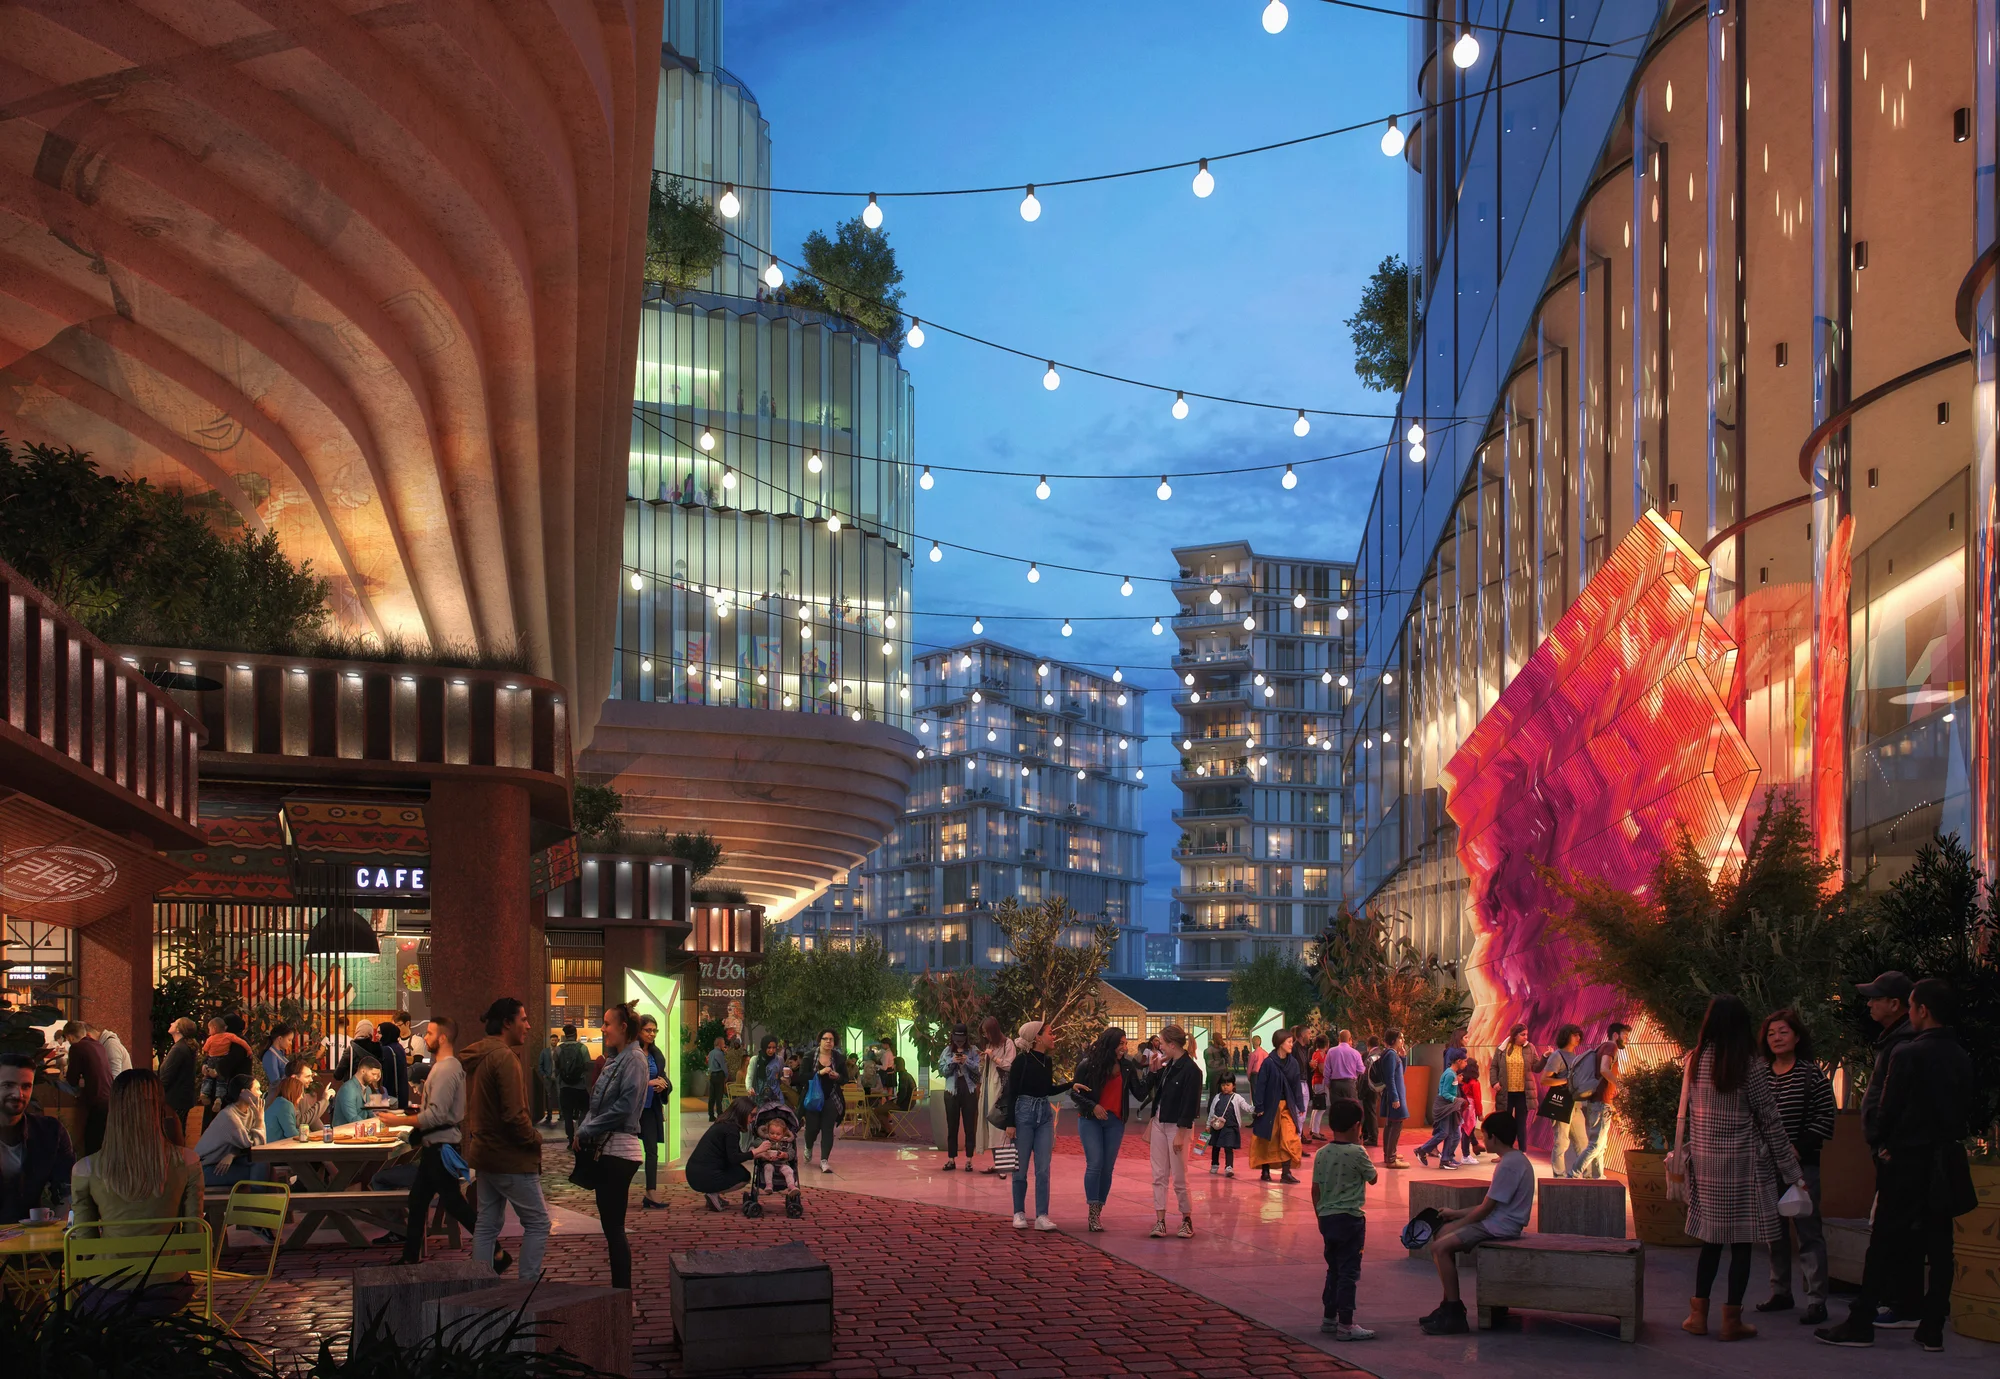 Rendering of people eating and congregating in the evening outside our proposed Downtown West mixed-use buildings in San Jose, California.